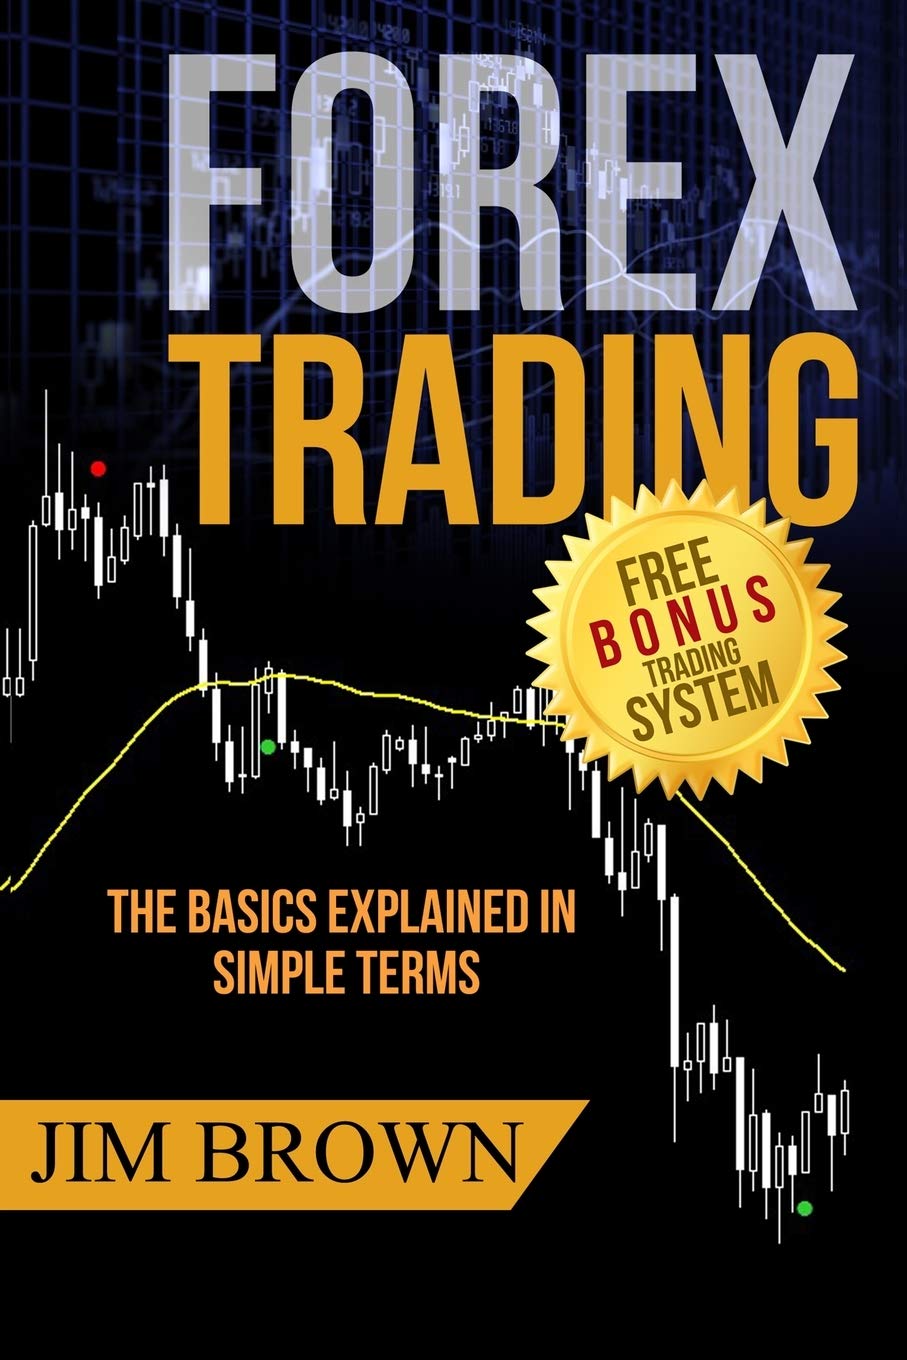 Forex book download french financial